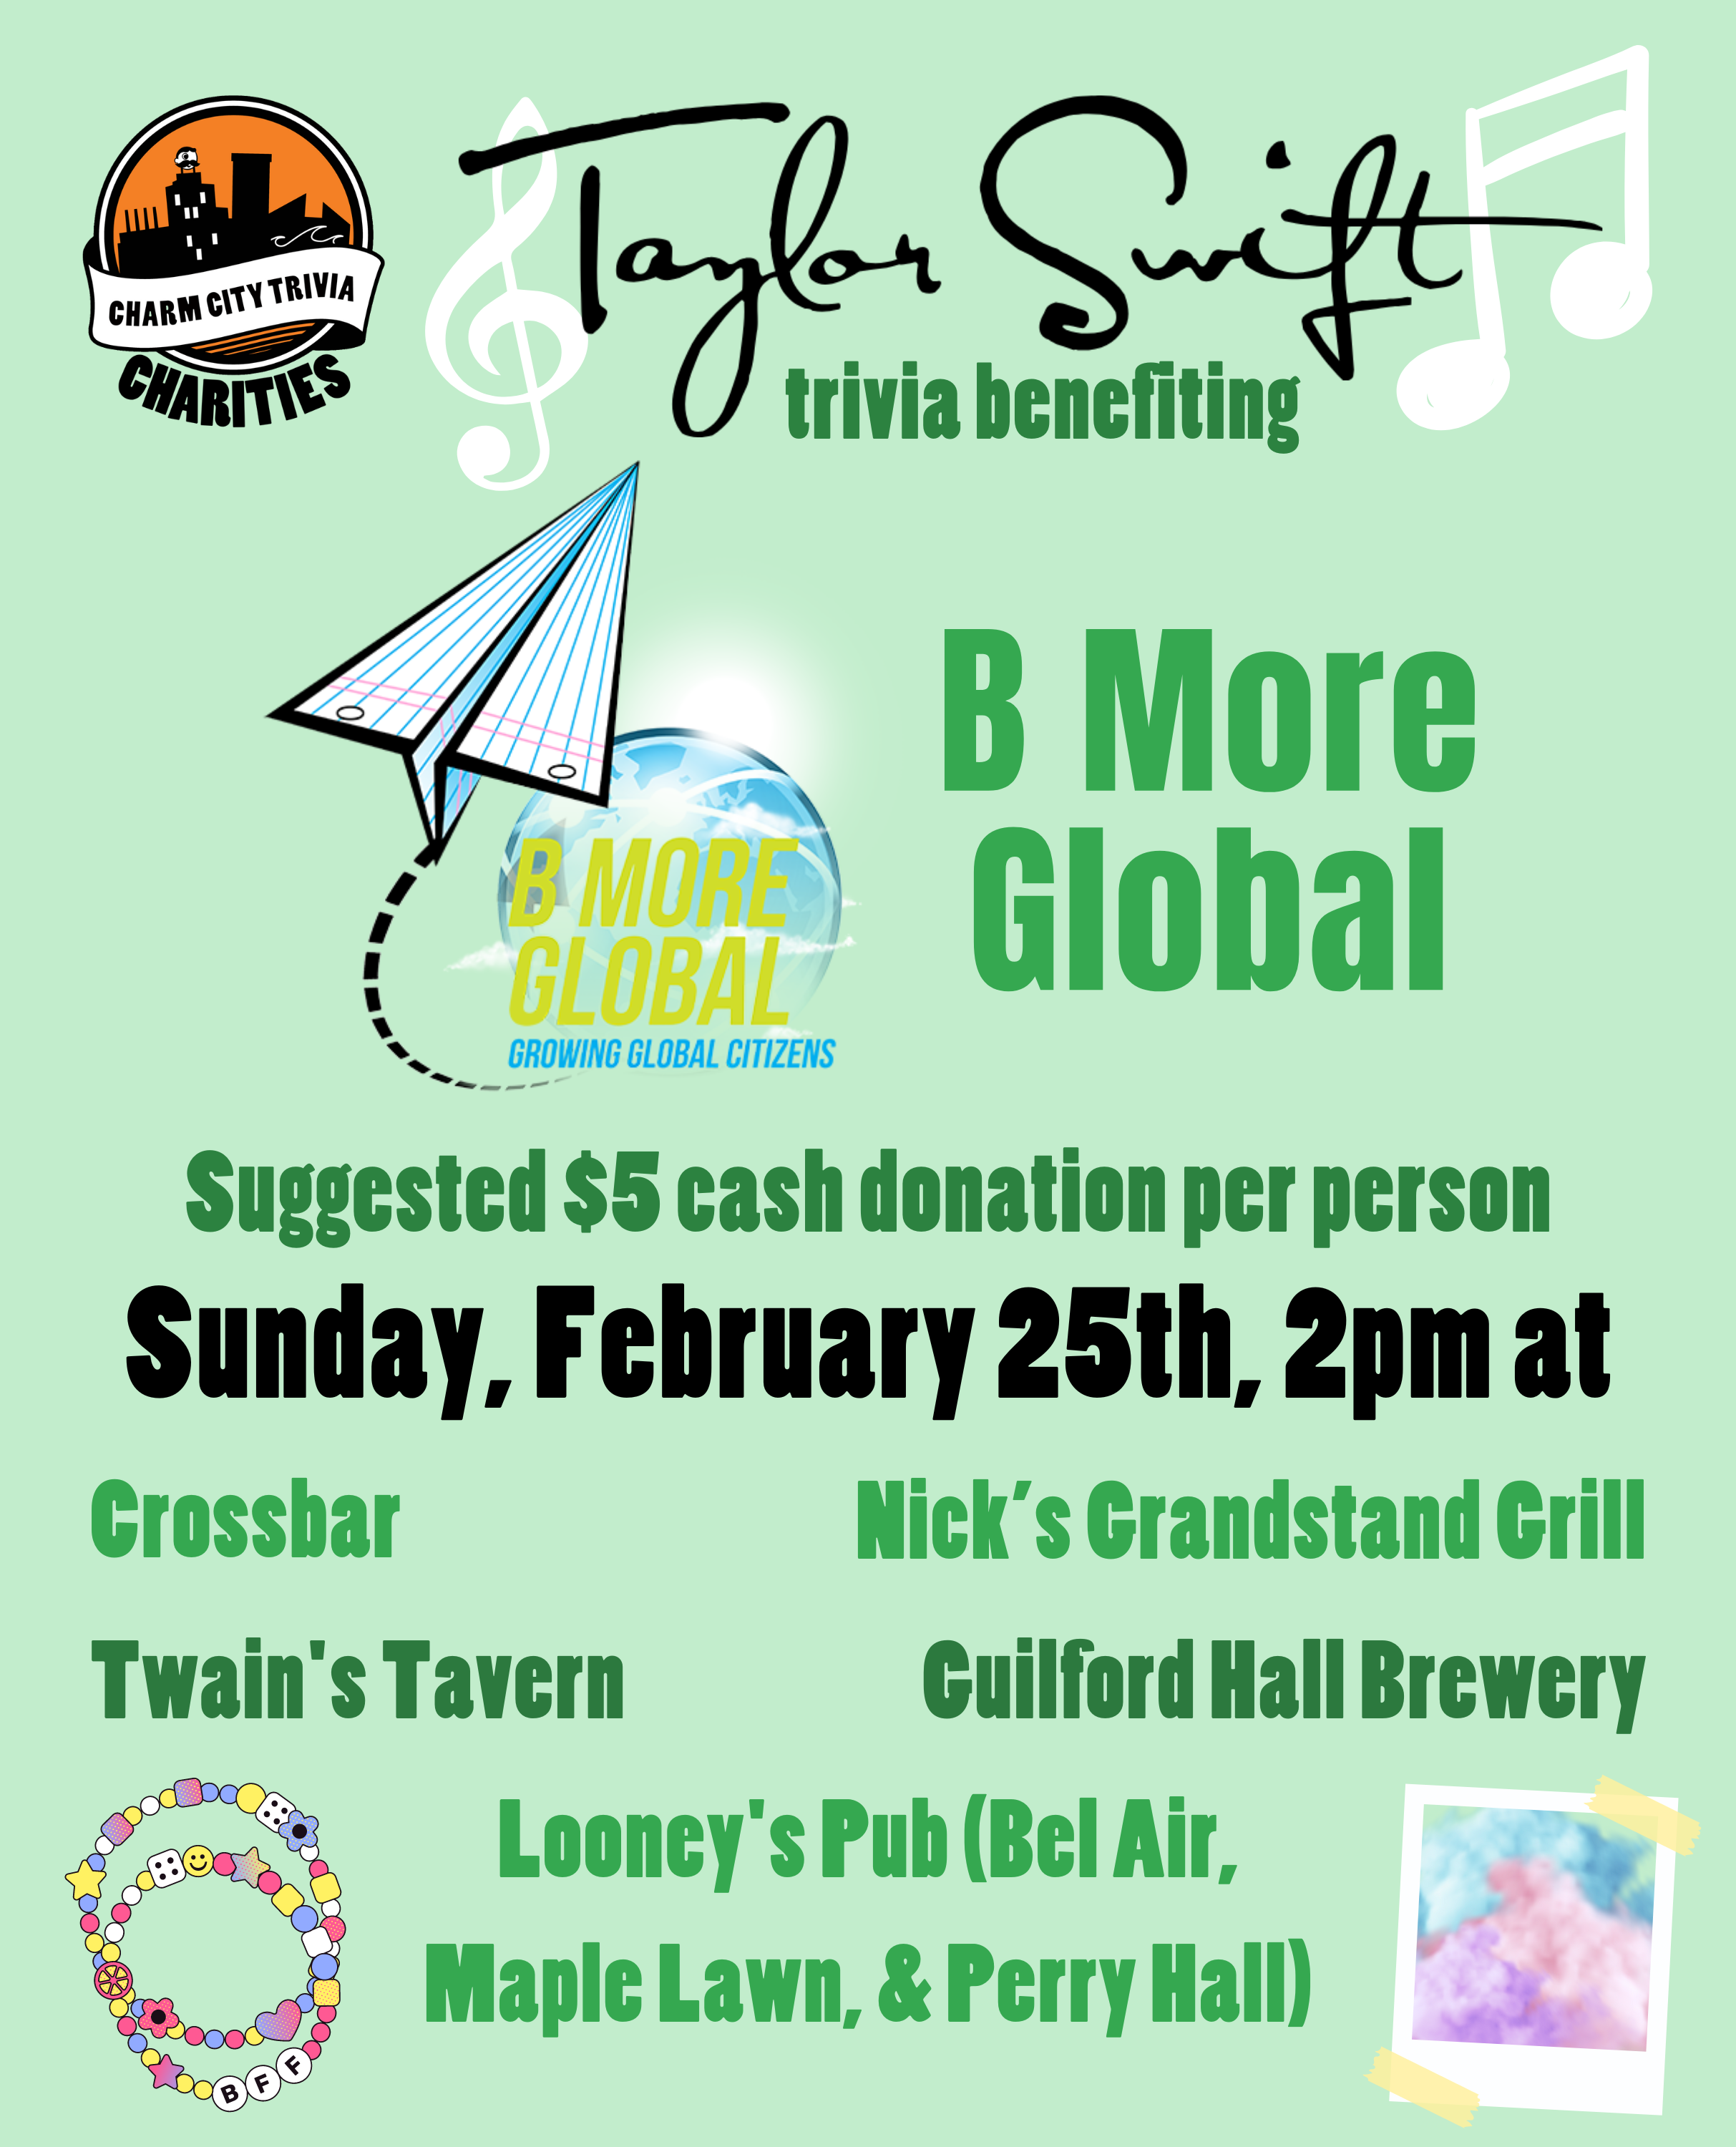 a light green background with the Charm City Trivia Charities logo, the B More Global logo, Taylor Swift's name, white music notes, friendship bracelets, a polaroid of colorful clouds, and dark green and black text. The text reads: Taylor Swift trivia benefiting B More Global. Suggested $5 cash donation per person. Sunday, February 25th, 2pm at. Crossbar. Guilford Hall Brewery. Nick's Grandstand Grill. Twain's Tavern. Looney's Pub (Bel Air, Maple Lawn, & Perry Hall)